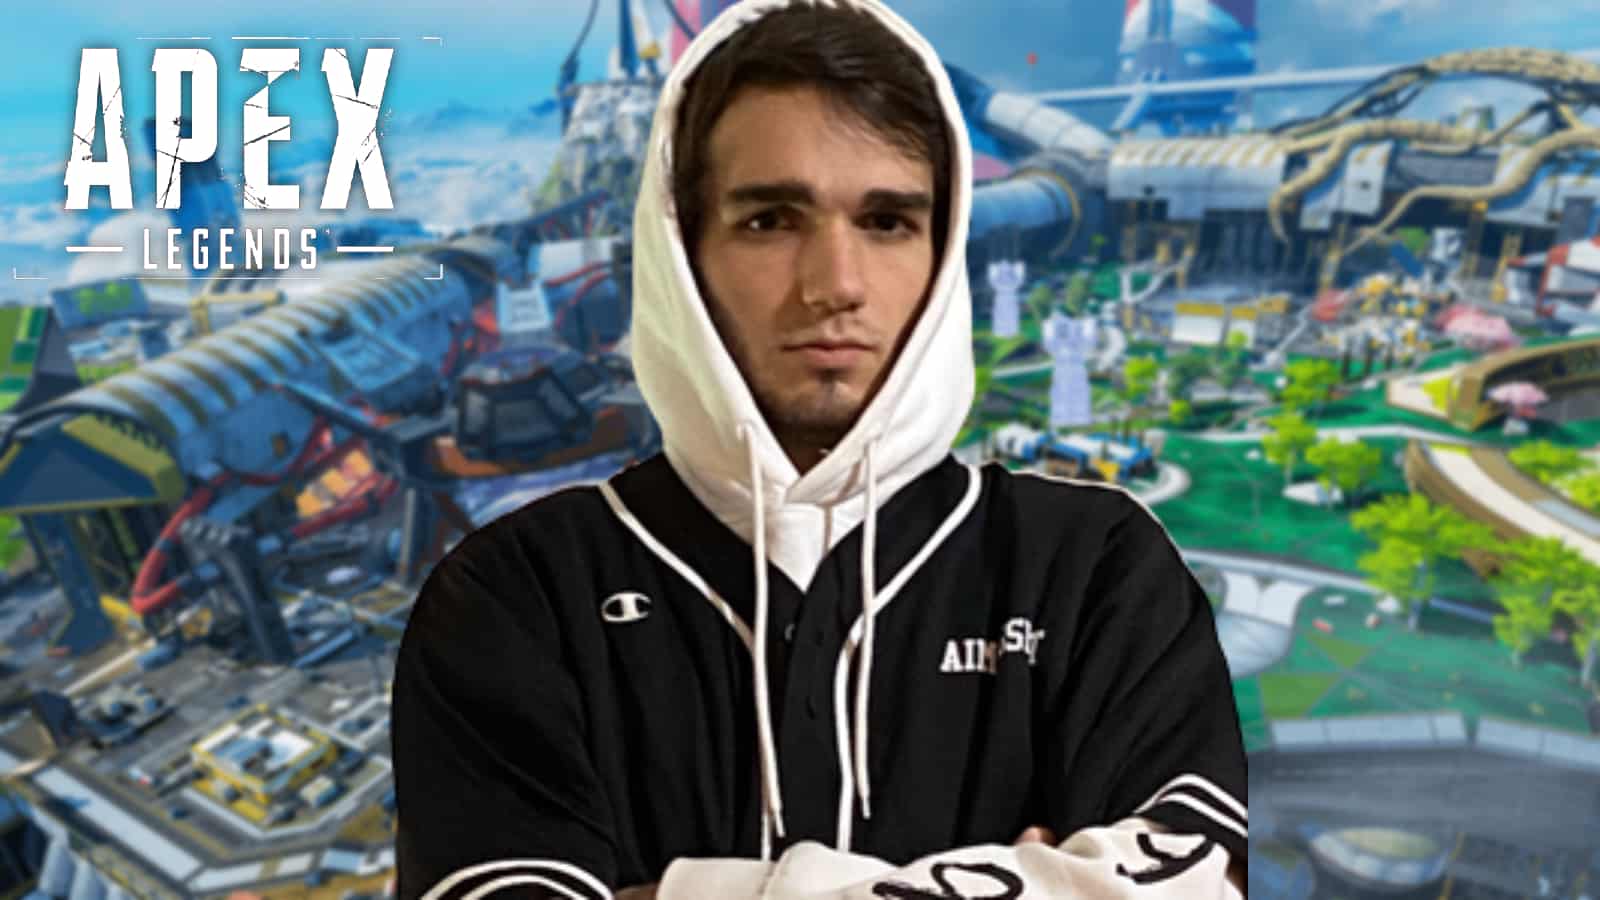 G2 Apex Legends pro called out for threatening fellow player: "Catch you at TwitchCon"